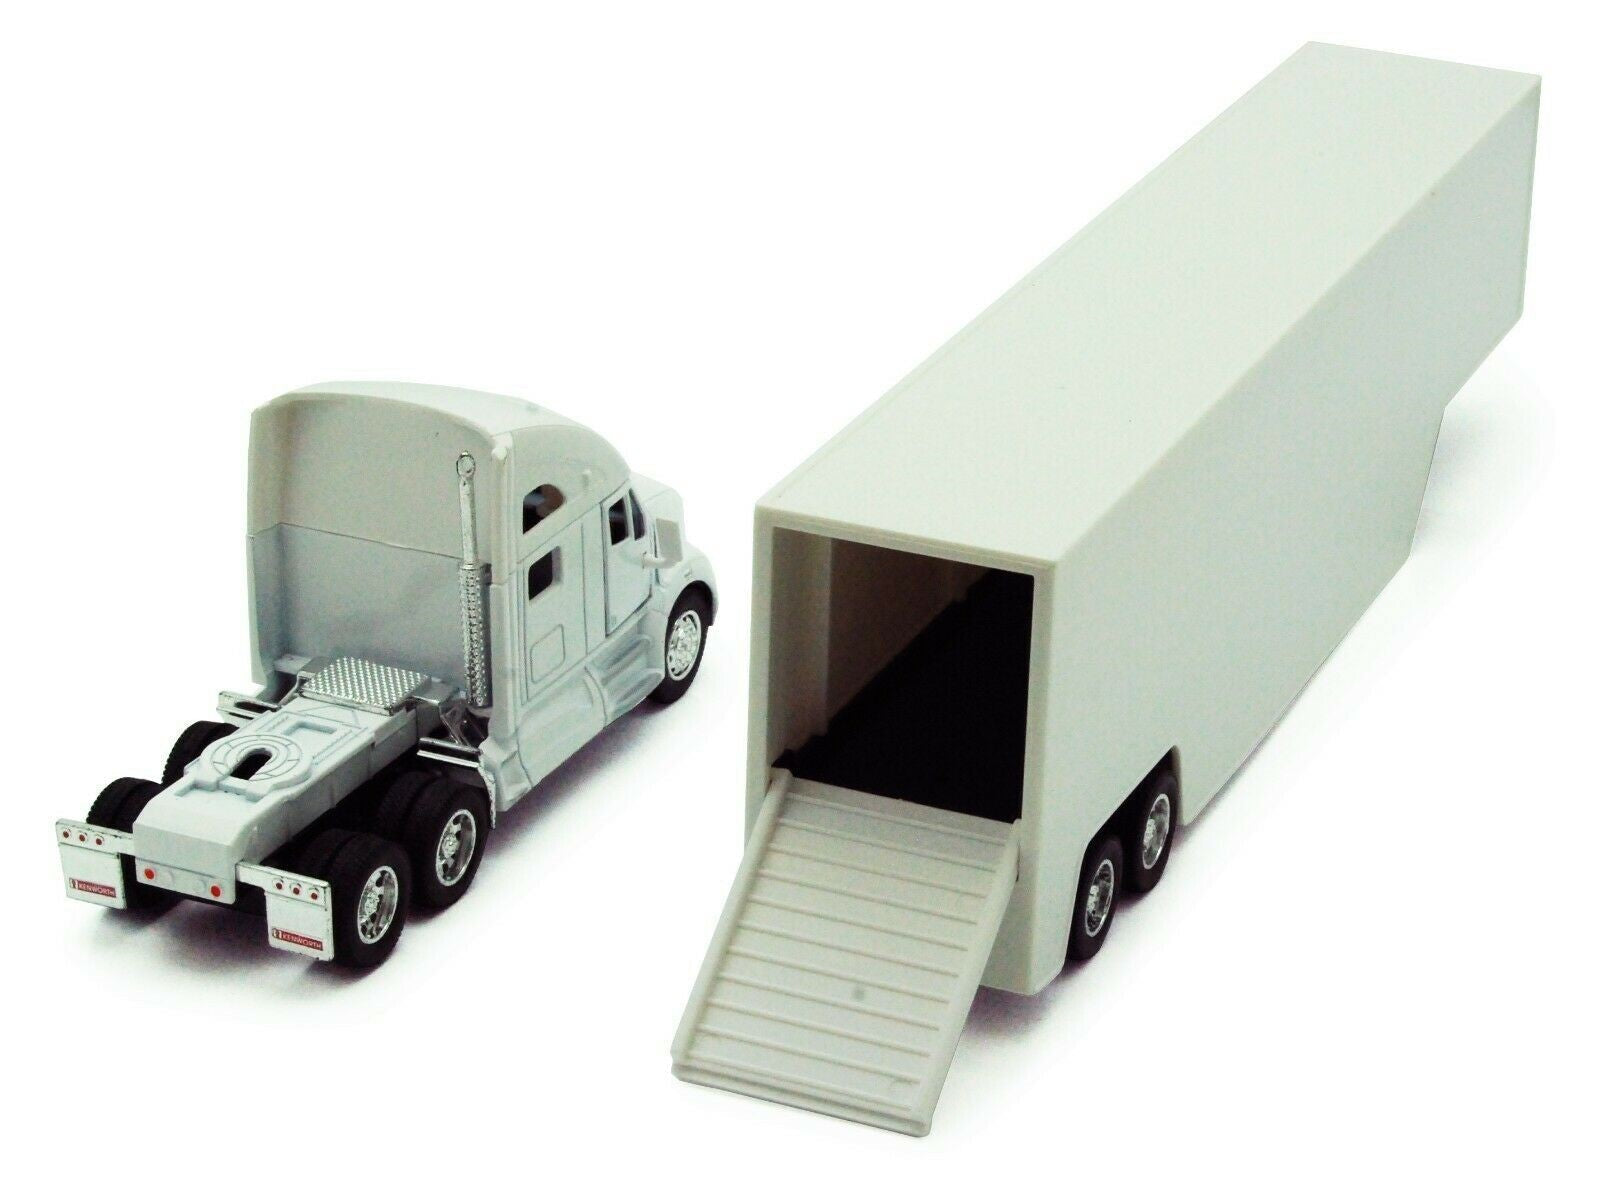  Kinsmart - Kenworth T700 Container Truck (1/68 scale die cast model car, White)